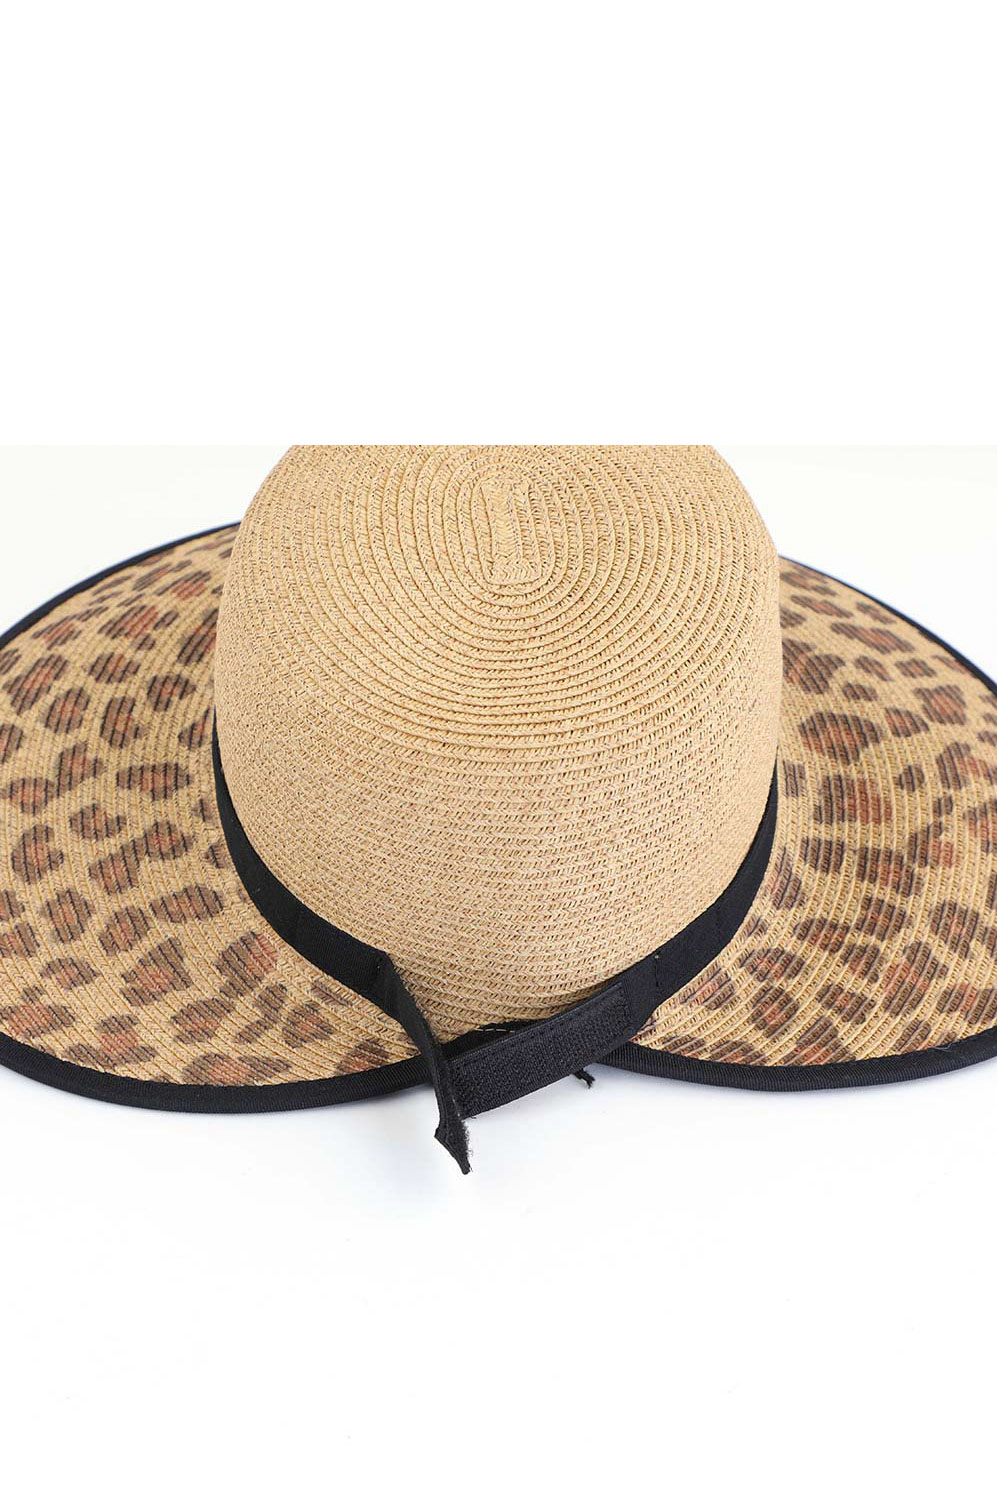 LEOPARD PRINTED WIDE BRIM STRAW SUN HAT WITH BACK OPENING DETAILS